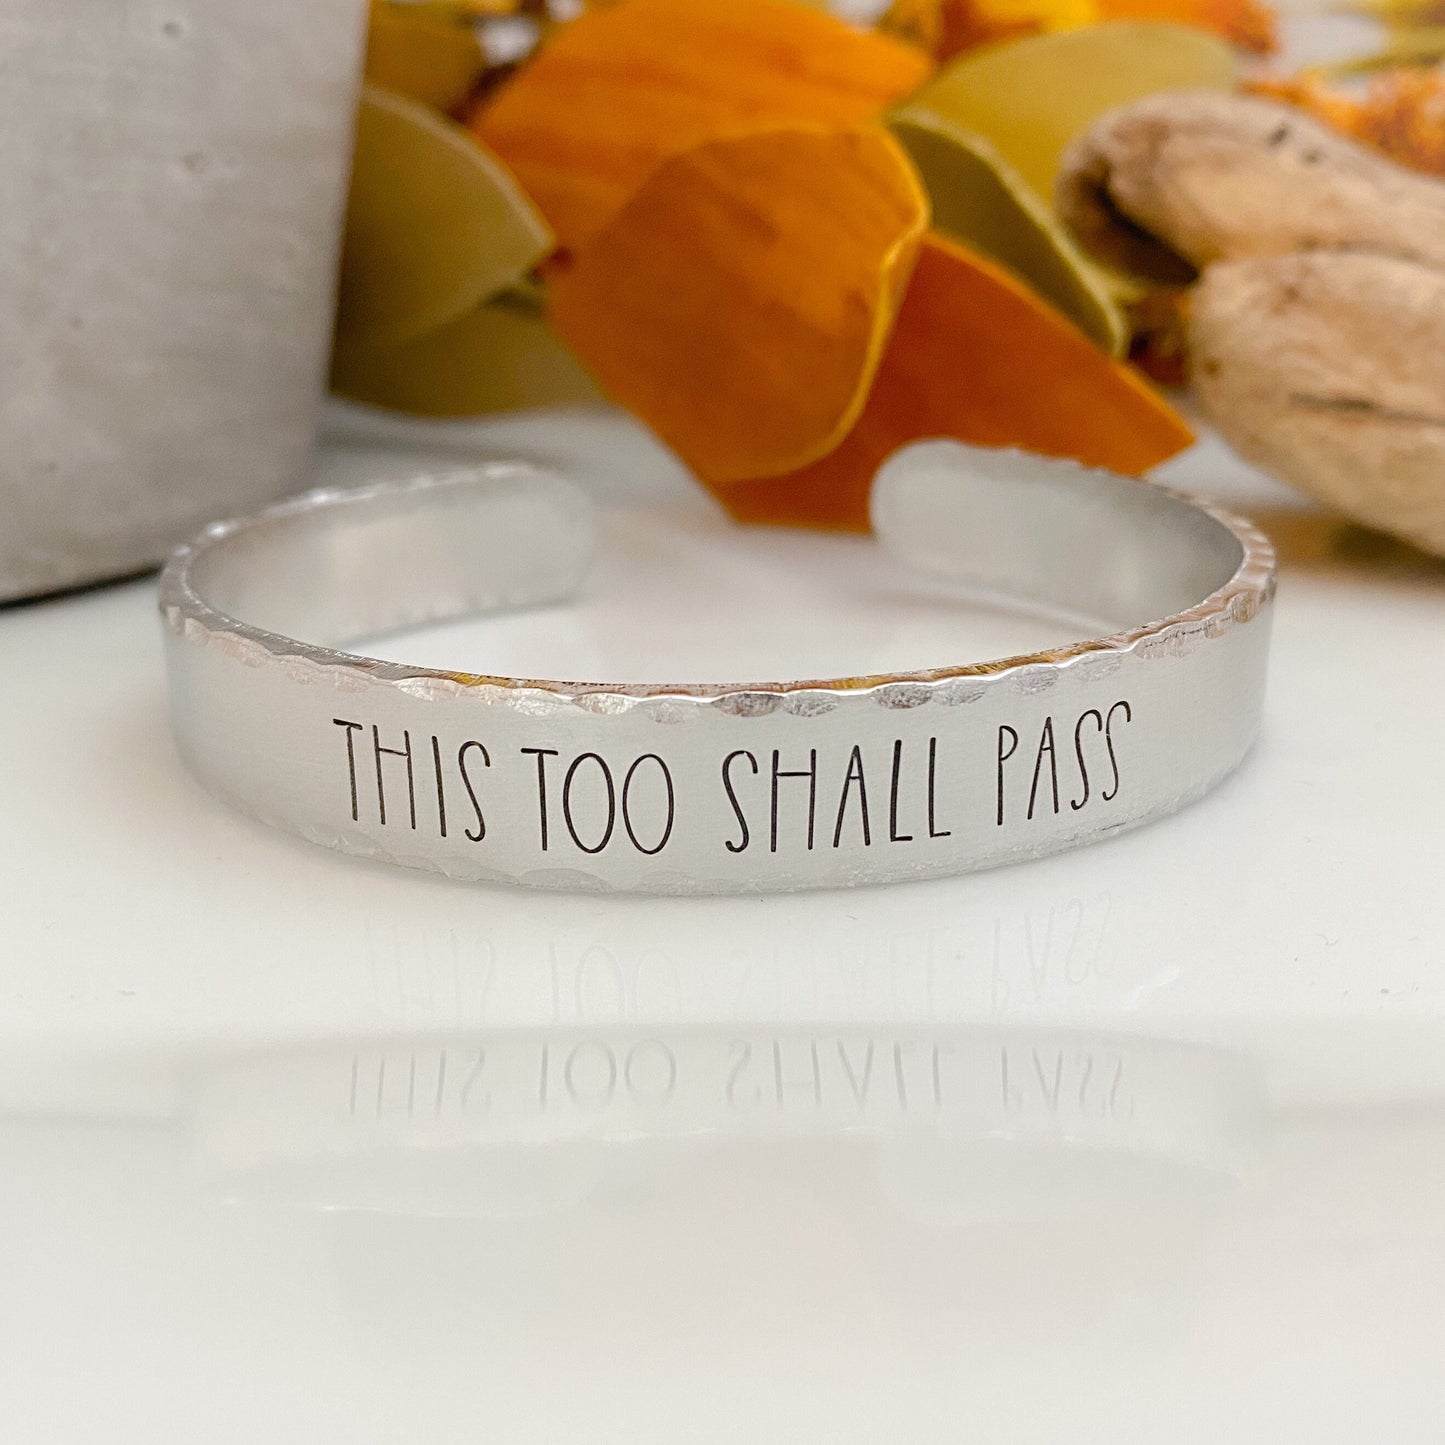 This too shall pass bracelet--encouragement jewelry